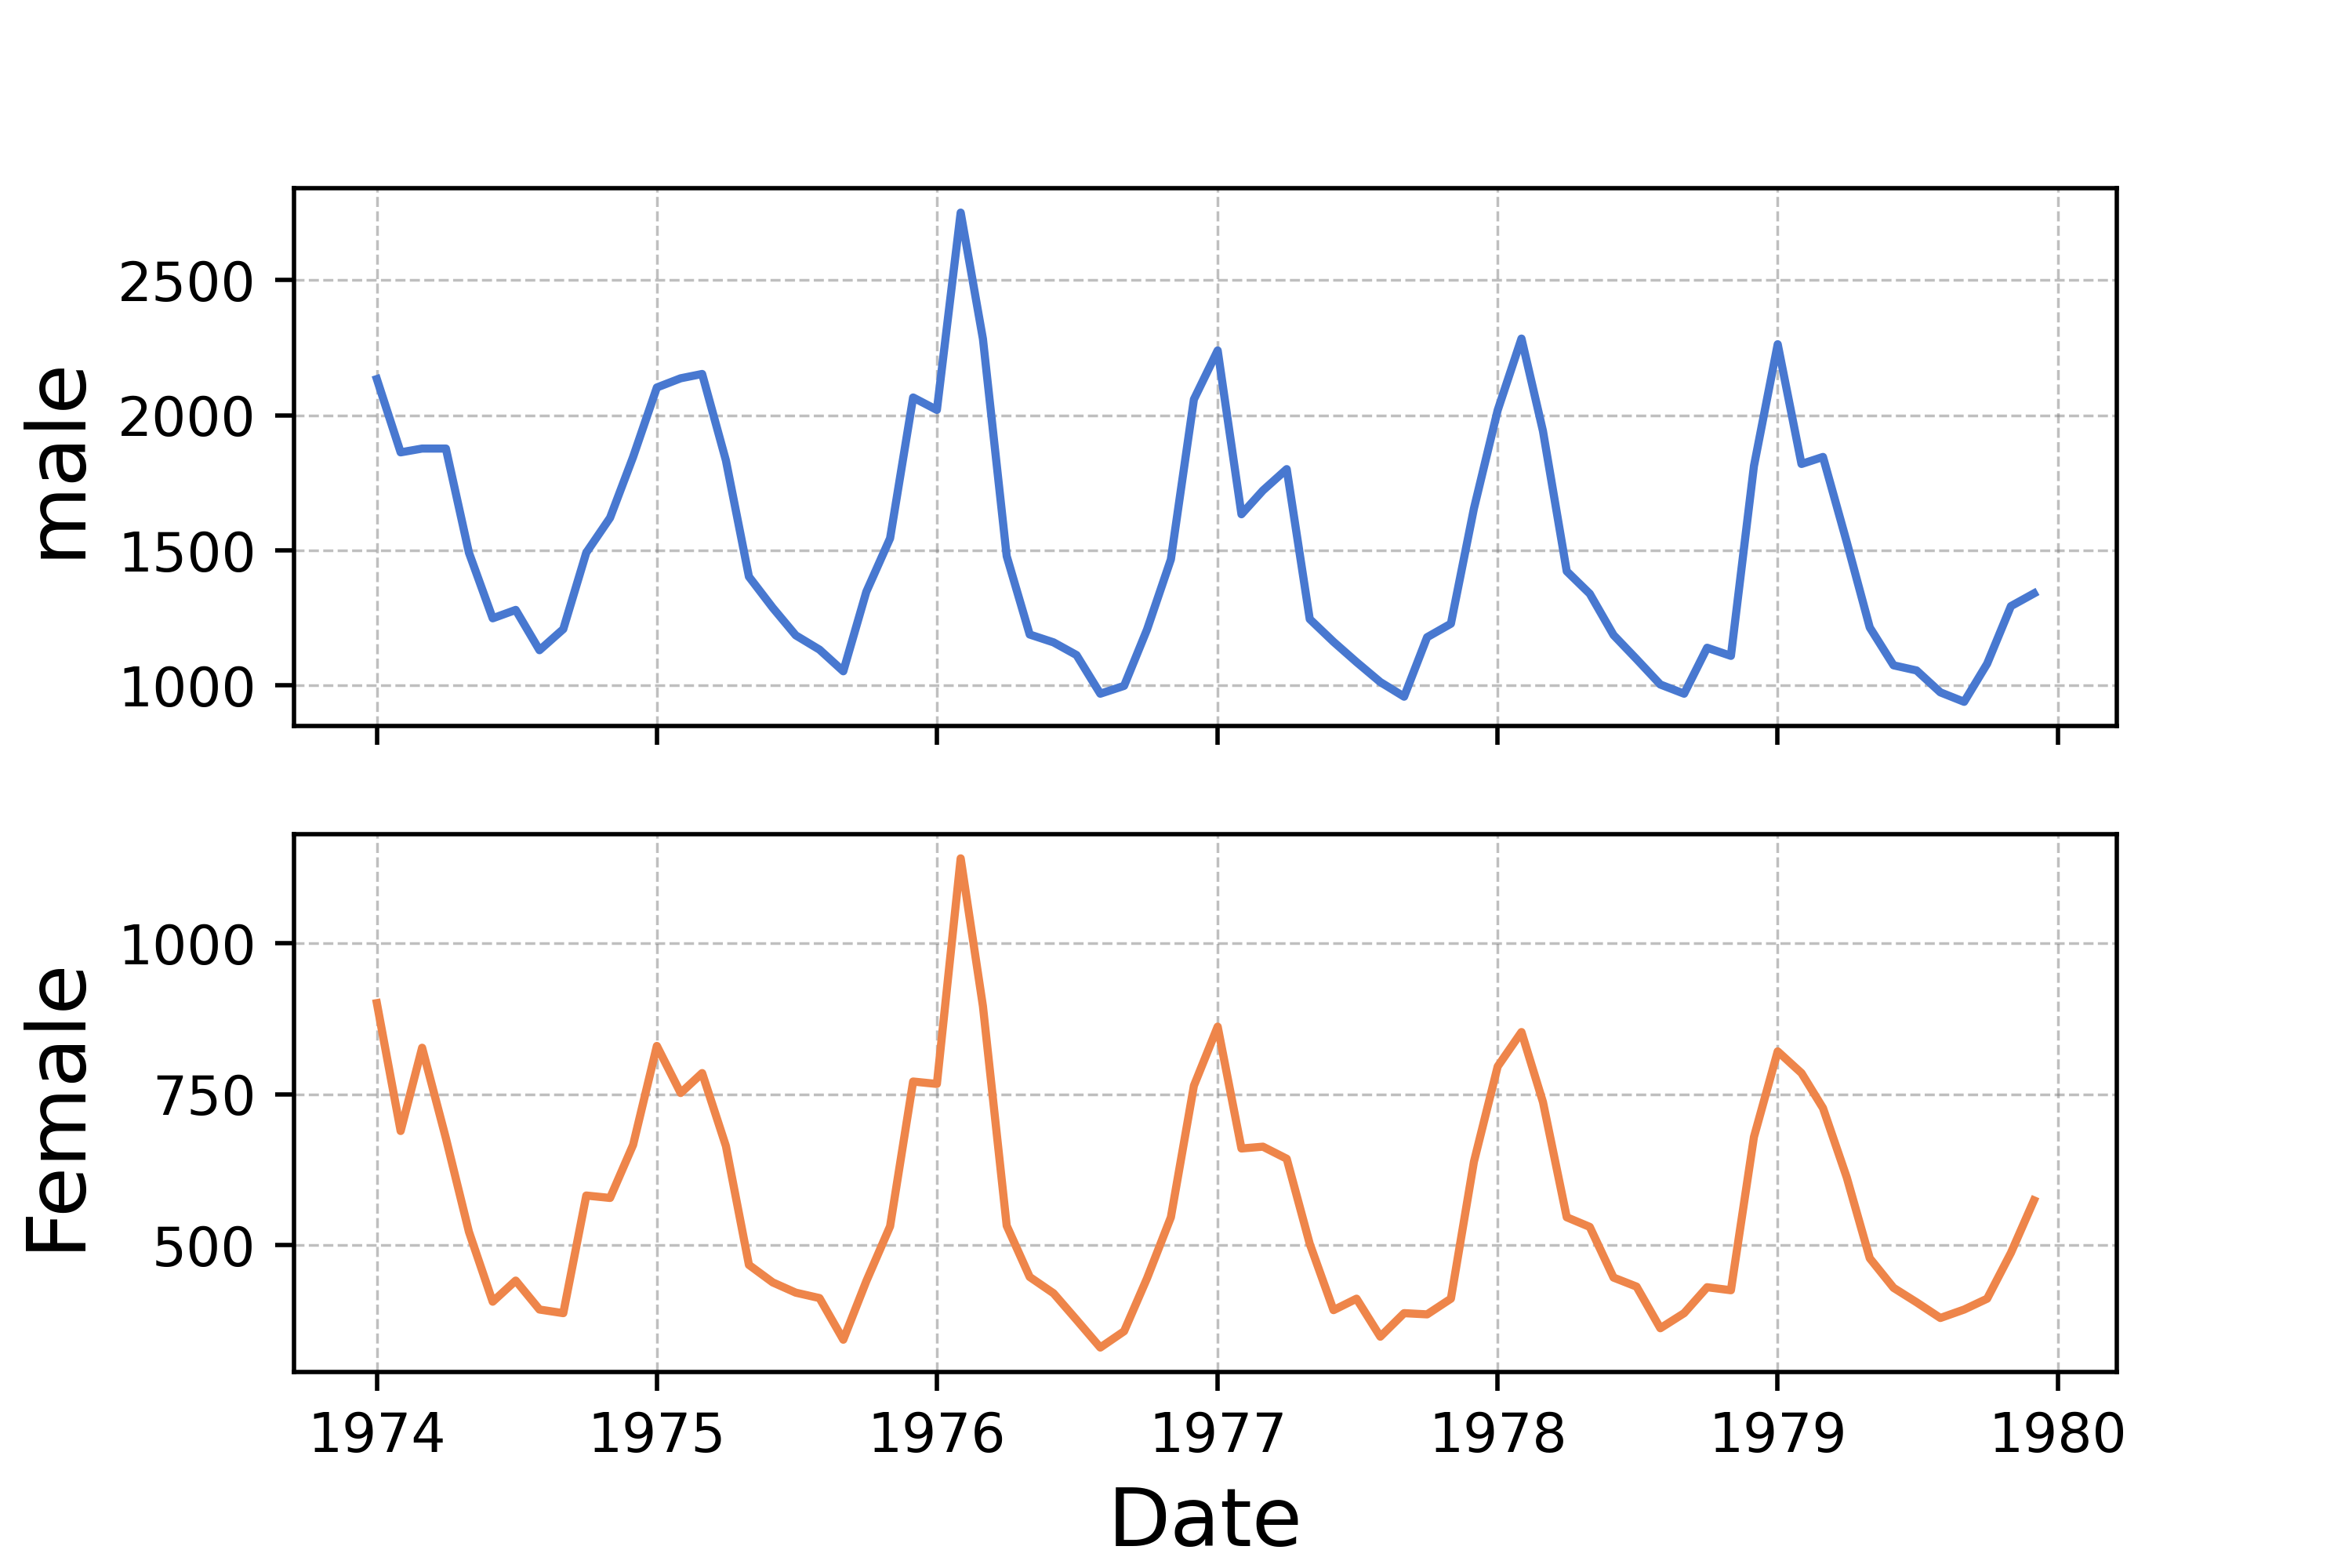 Time series with multiple plots